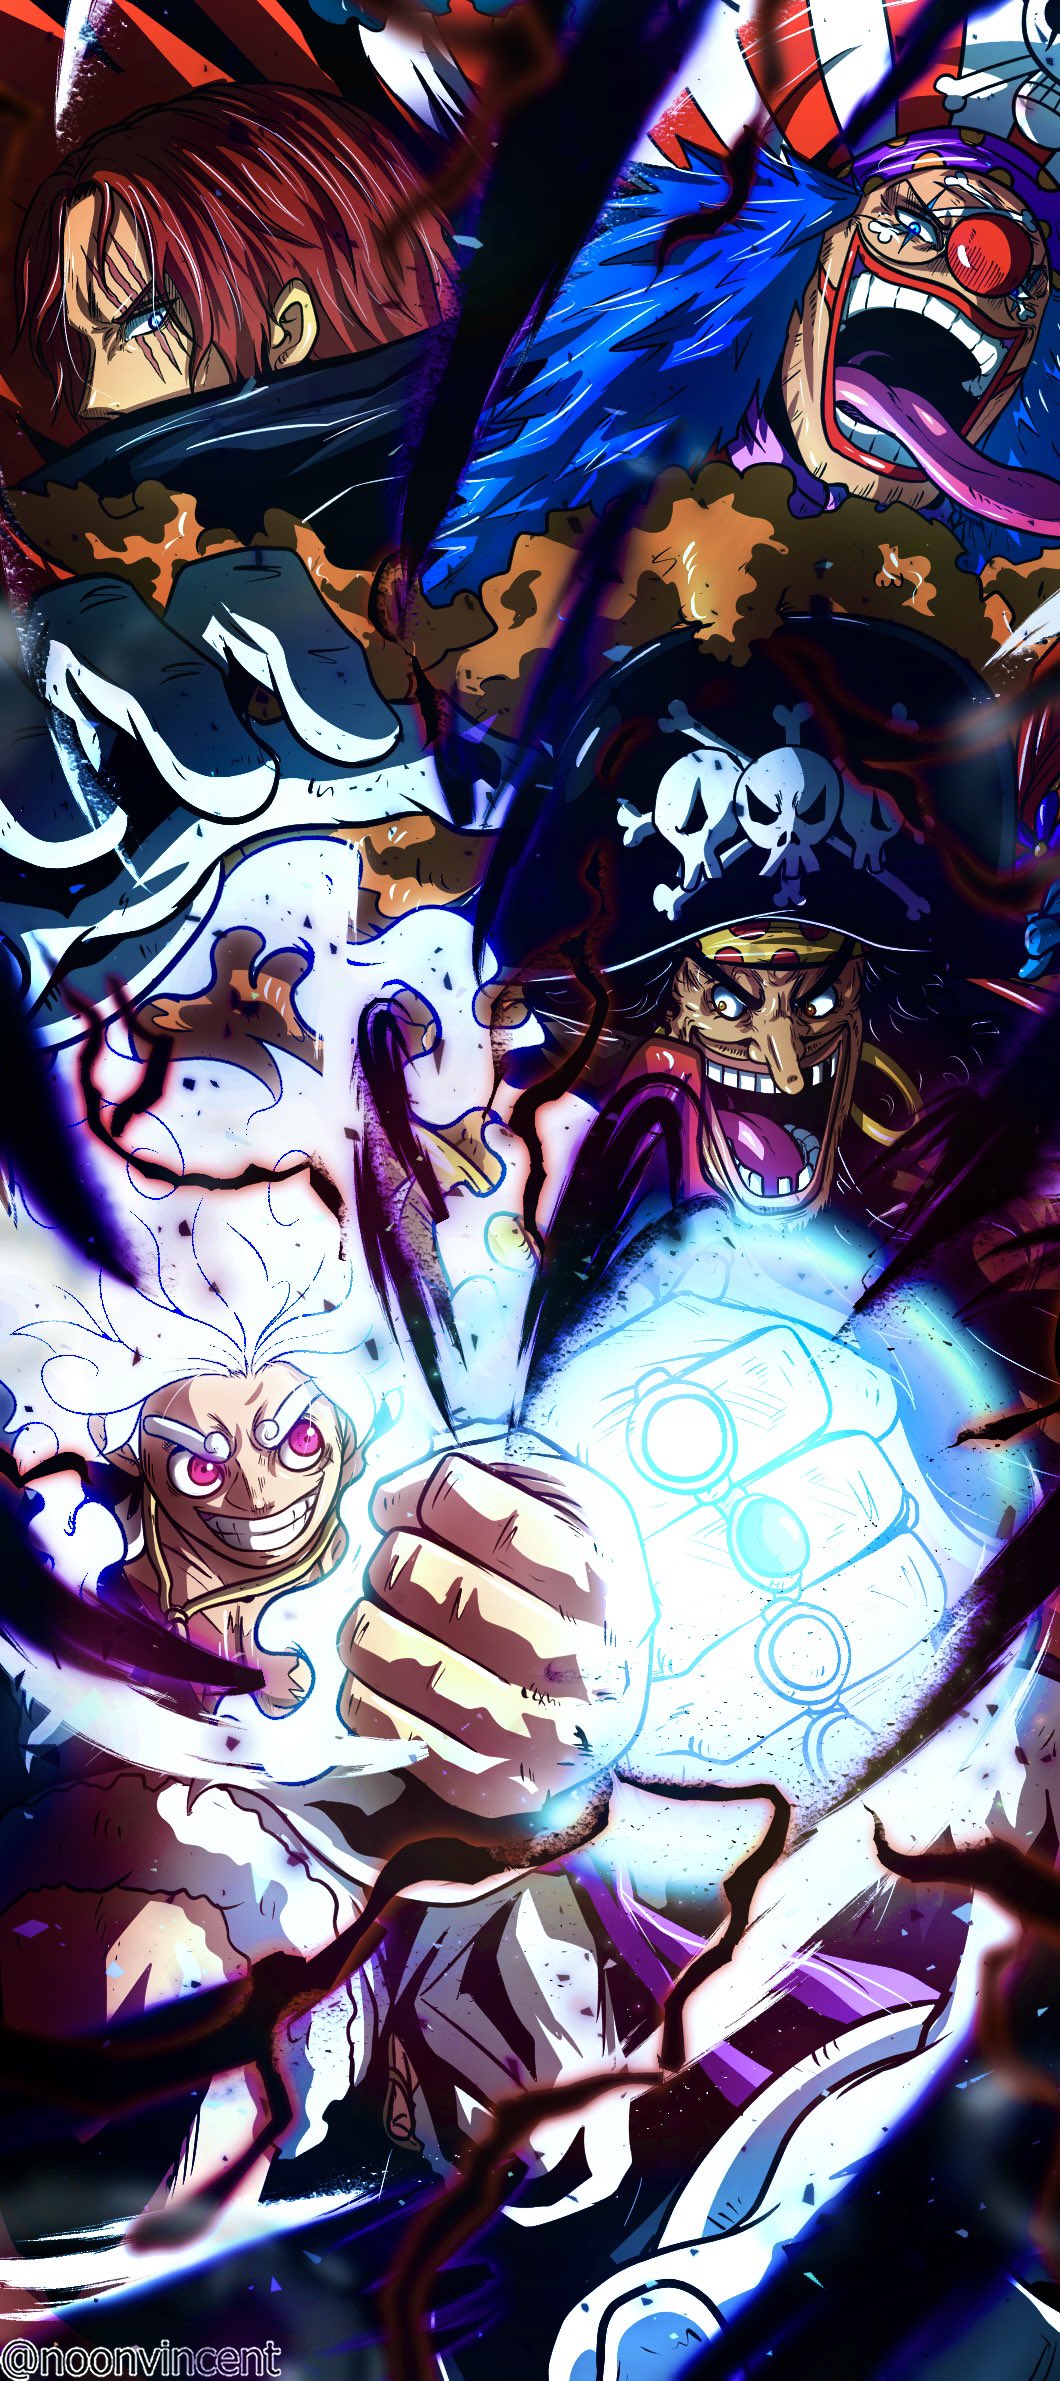 Anime 1060x2381 One Piece vincentnoon Monkey D. Luffy Gear 5th Marshall D. Teach Shanks Buggy (One Piece) fist open mouth lightning smiling portrait display teeth men with hats rings anime boys hat